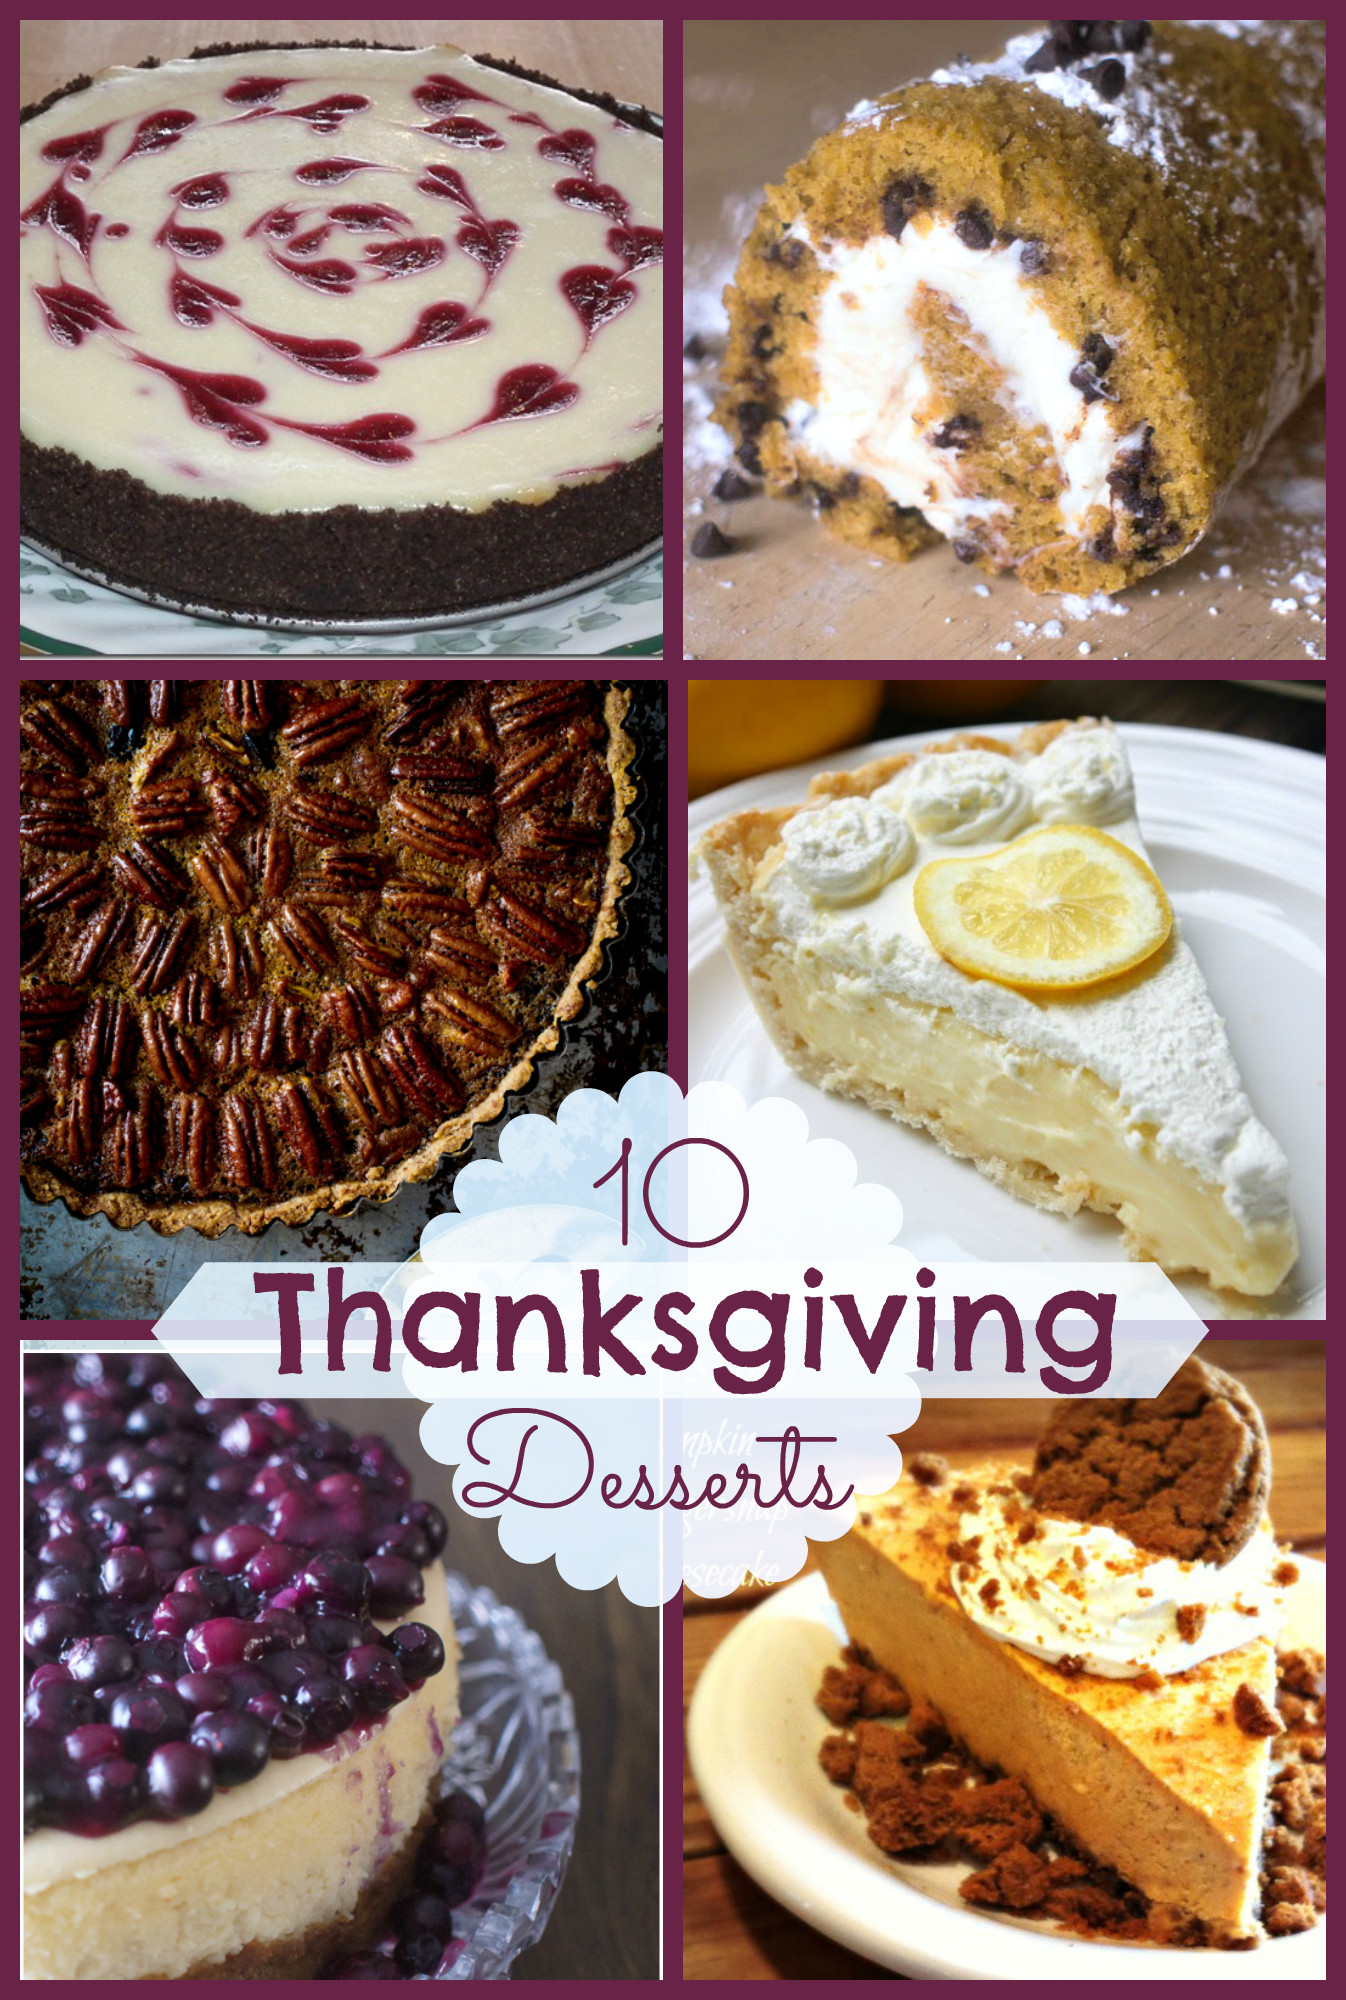 Pies For Thanksgiving
 10 Fabulous Thanksgiving Desserts